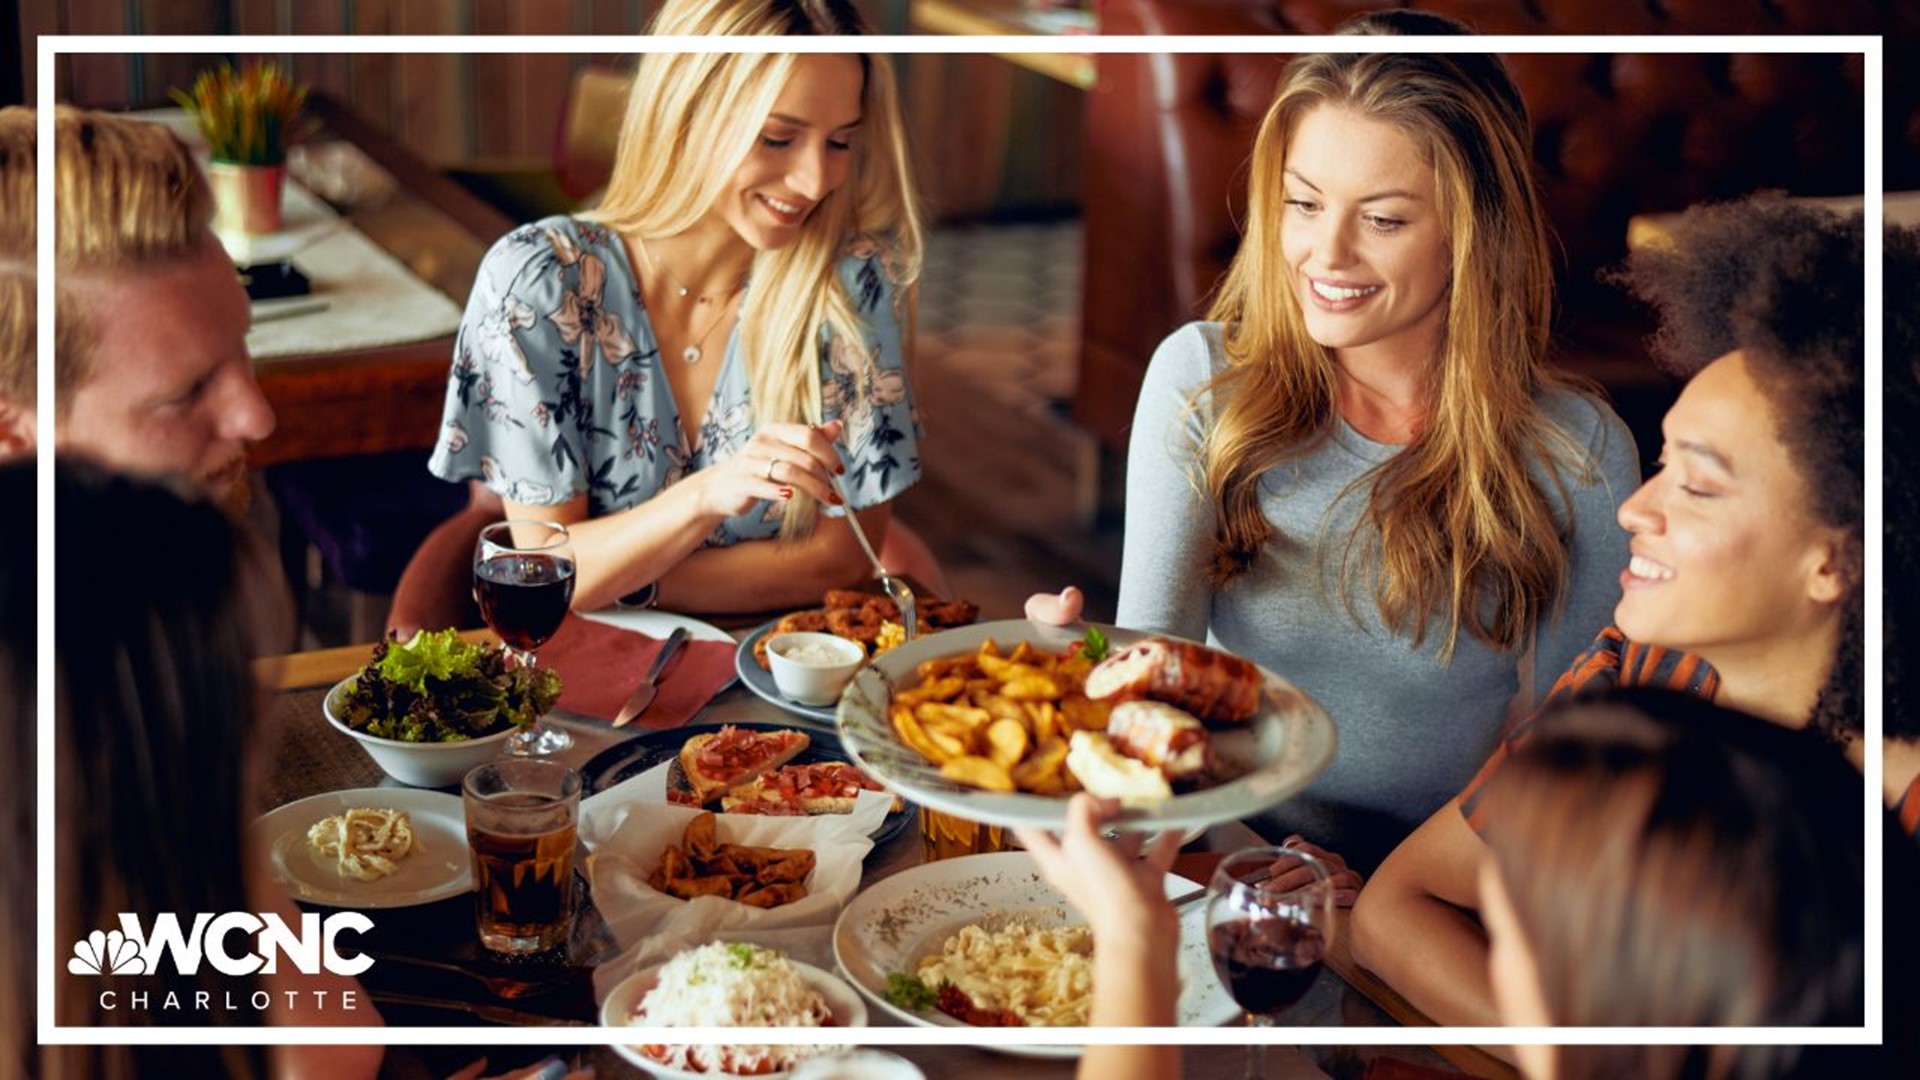 Busy restaurants have a message for customers: Come dine in with us but leave your extra friends at home.